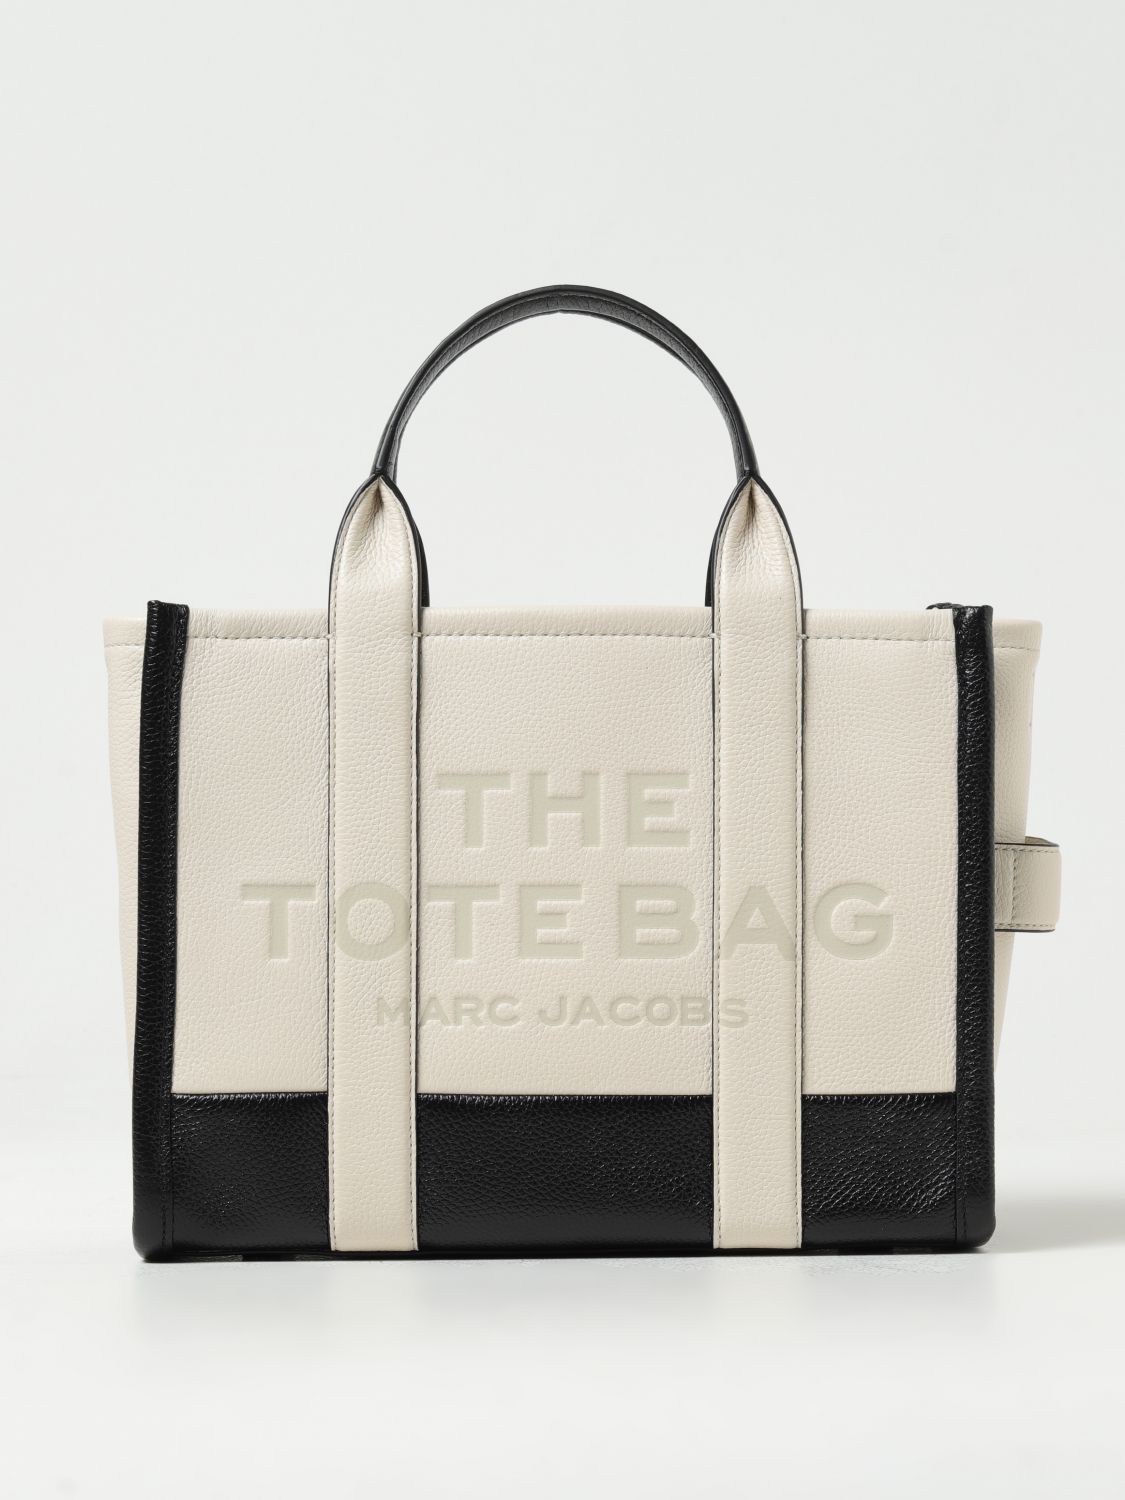 MARC JACOBS THE COLORBLOCK MEDIUM TOTE BAG IN GRAINED LEATHER,F09977044